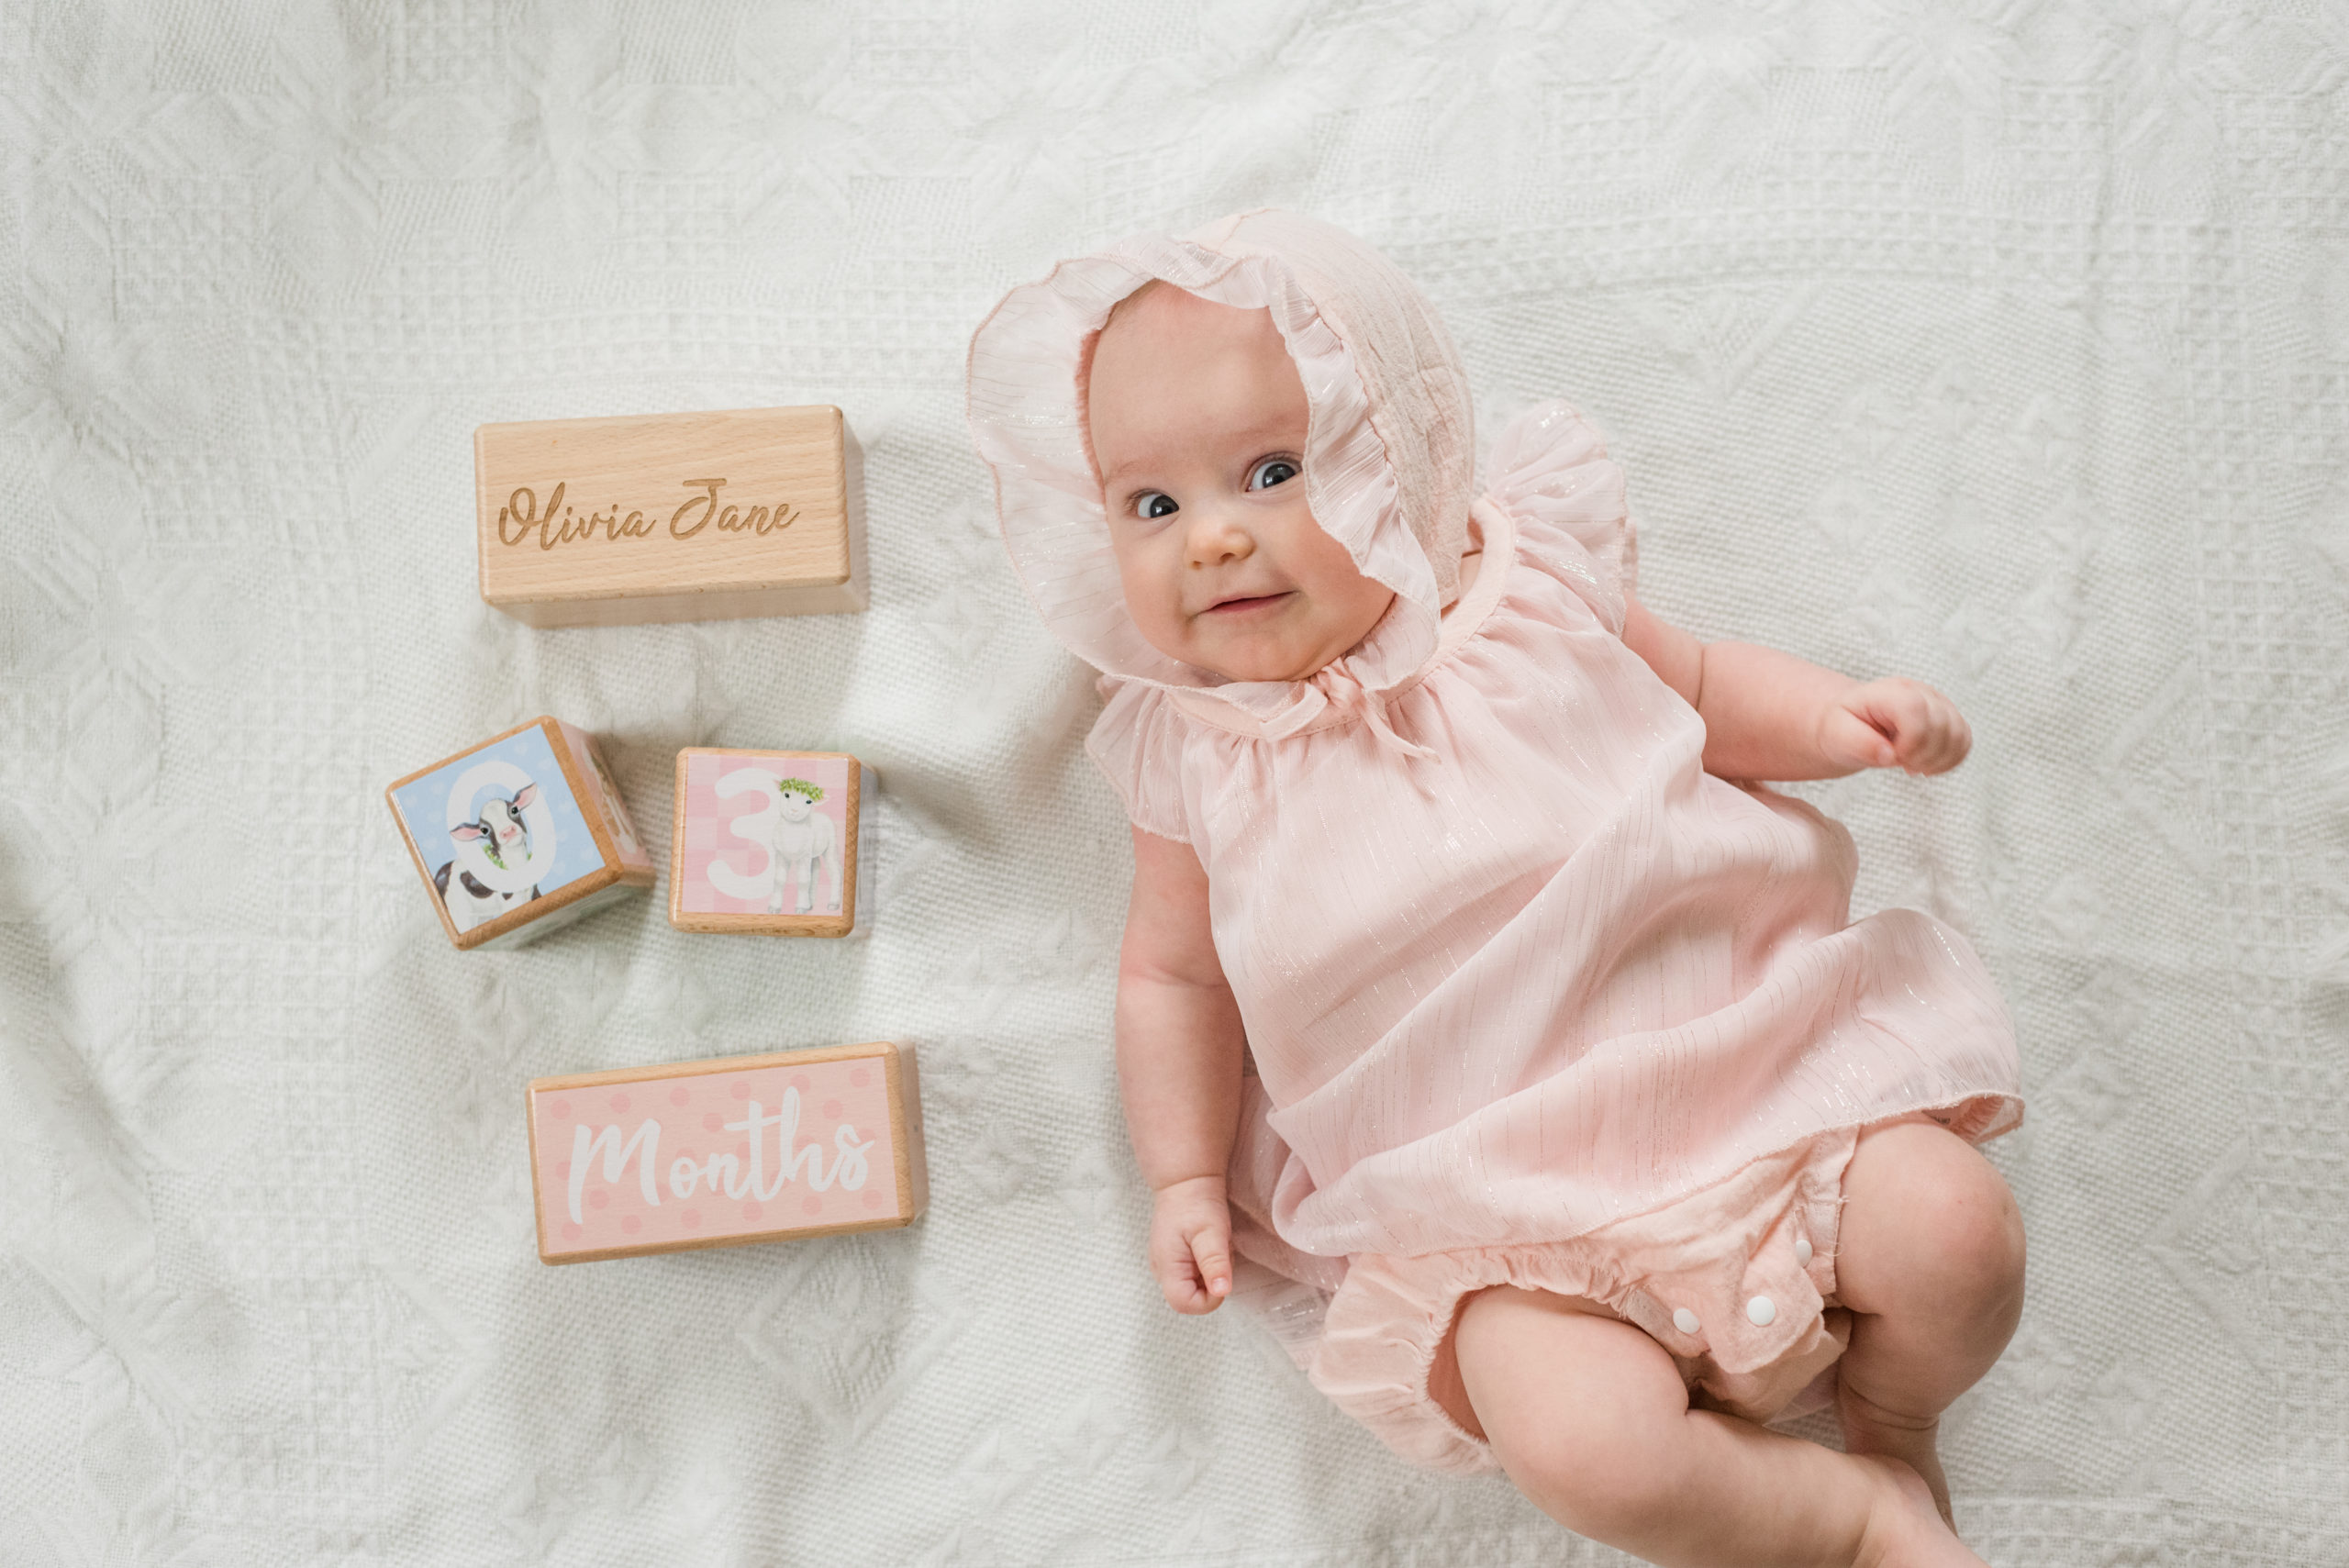 Olivia 3 Months Old - Sweet Williams Photography is a lifestyle, engagement, and wedding photographer serving the Nashville, Tennessee area and destination locations.